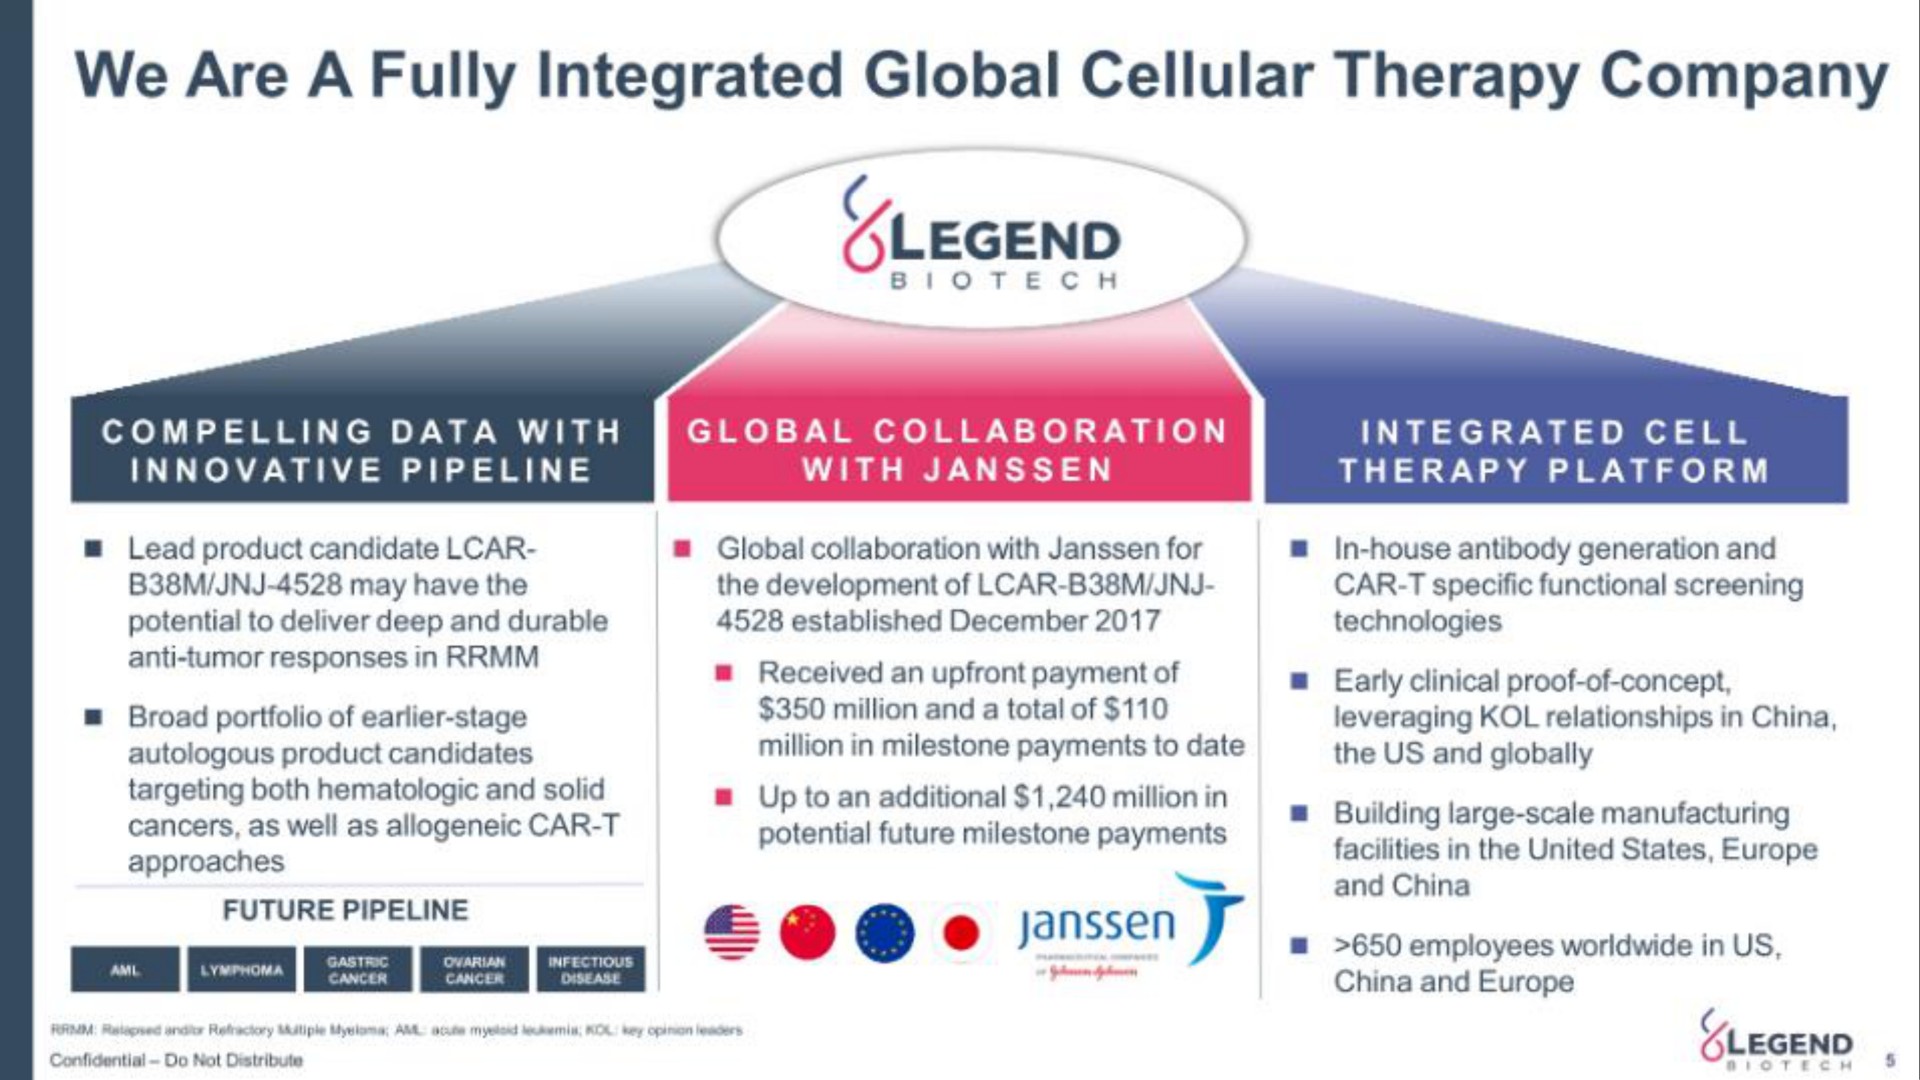 we are a fully integrated global cellular therapy company | Legend Biotech